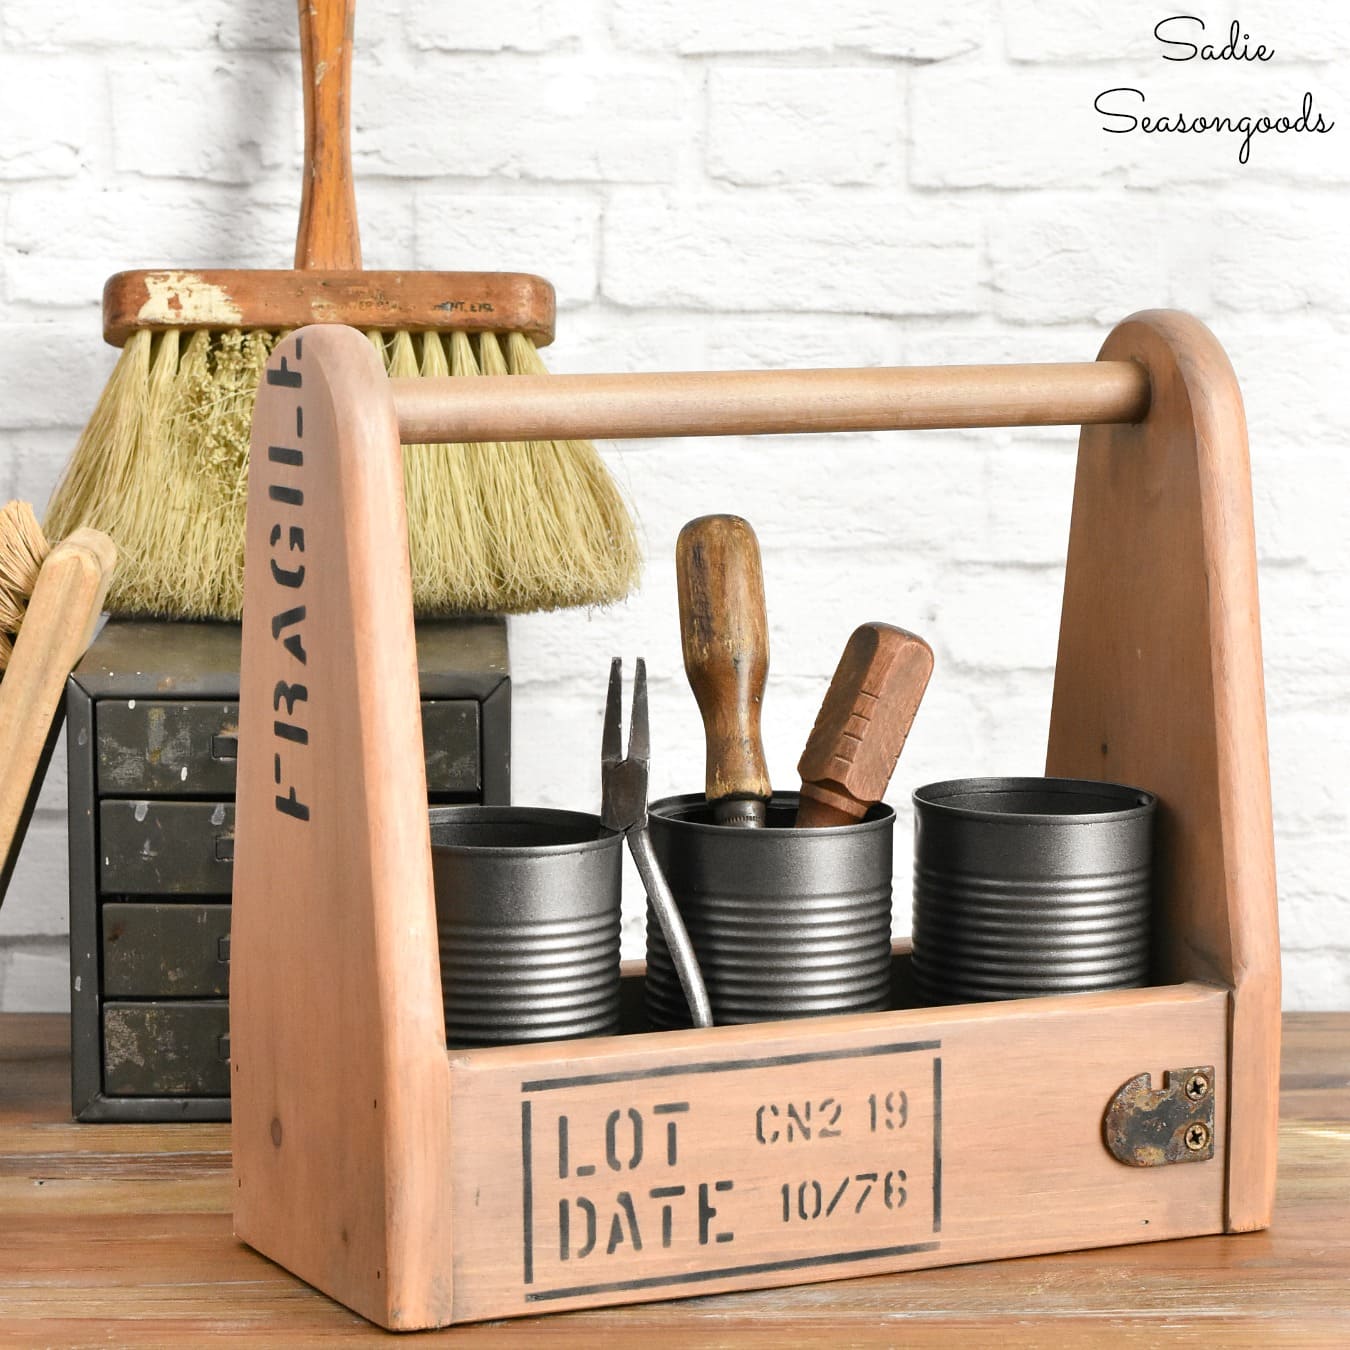 Industrial Style Decor with a Wooden Tool Caddy and Tin Cans